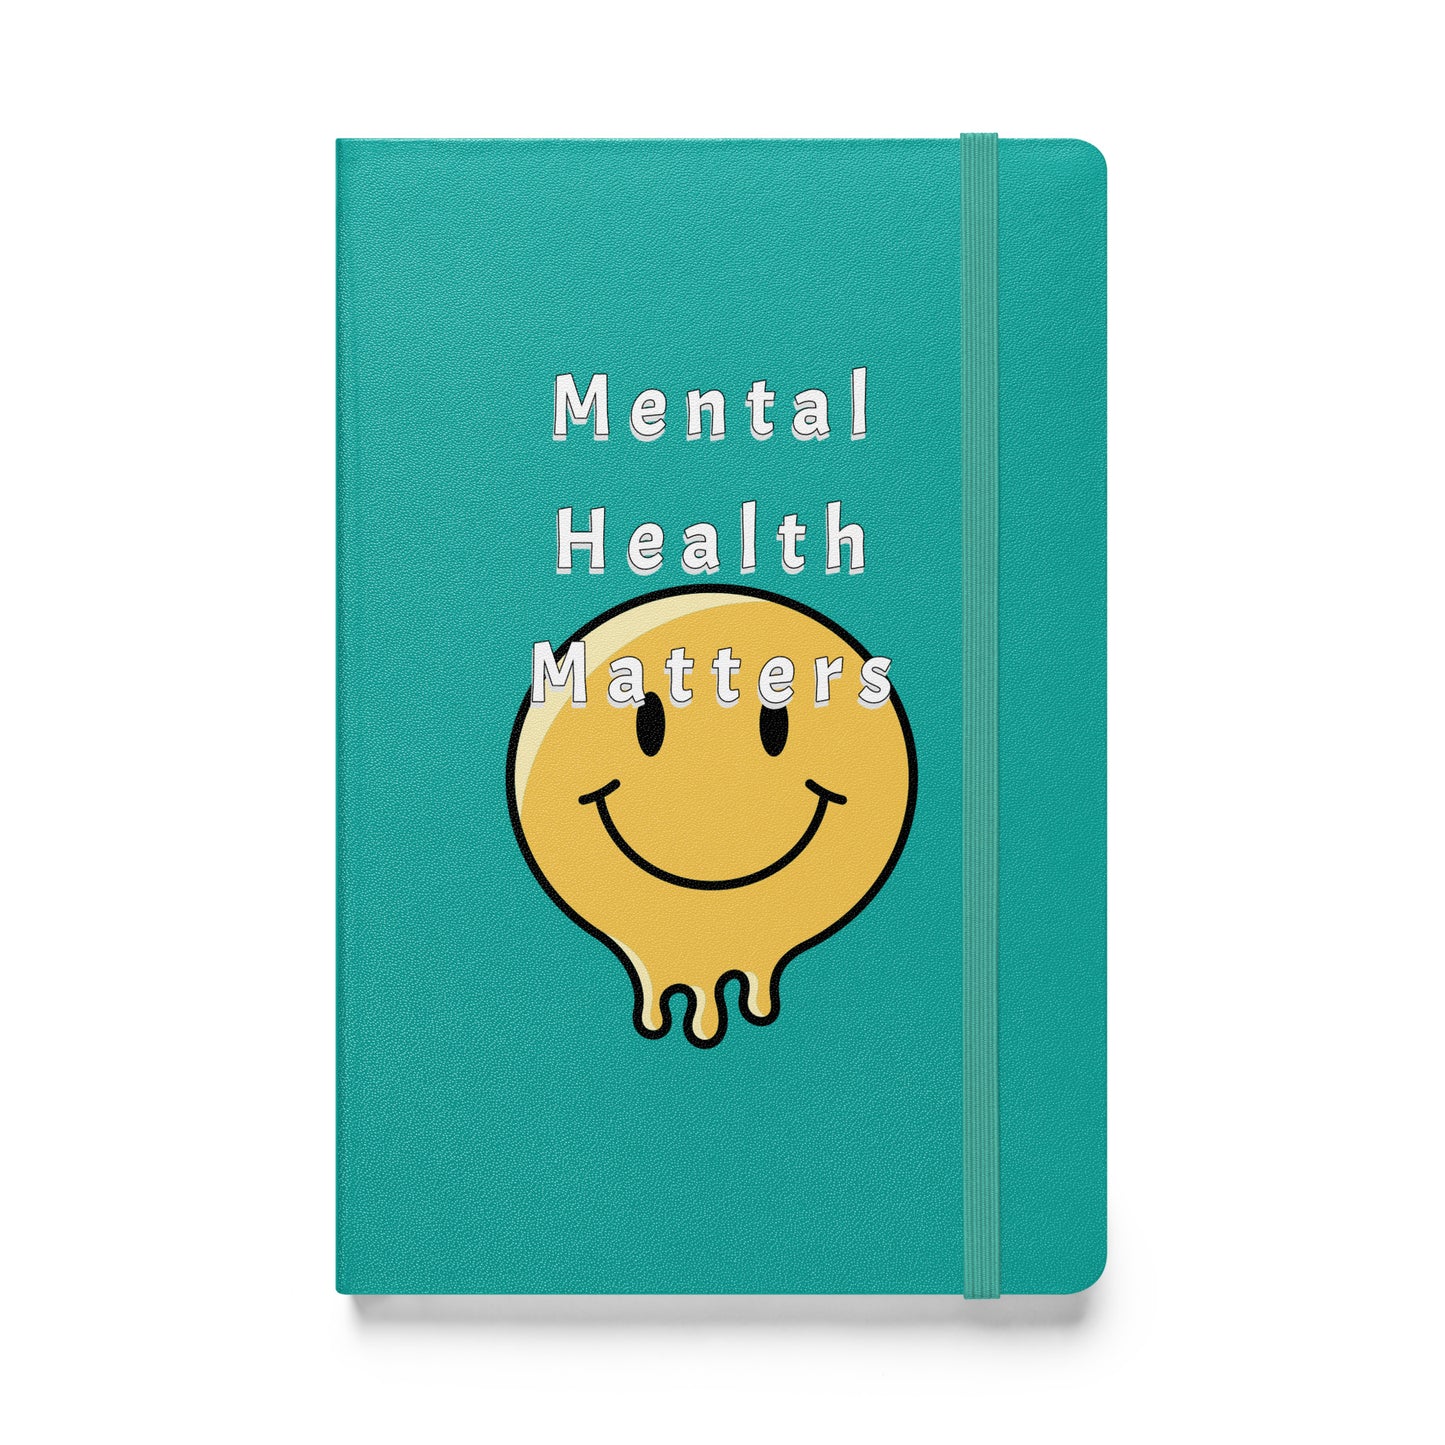 Mental Health Matters hardcover bound notebook